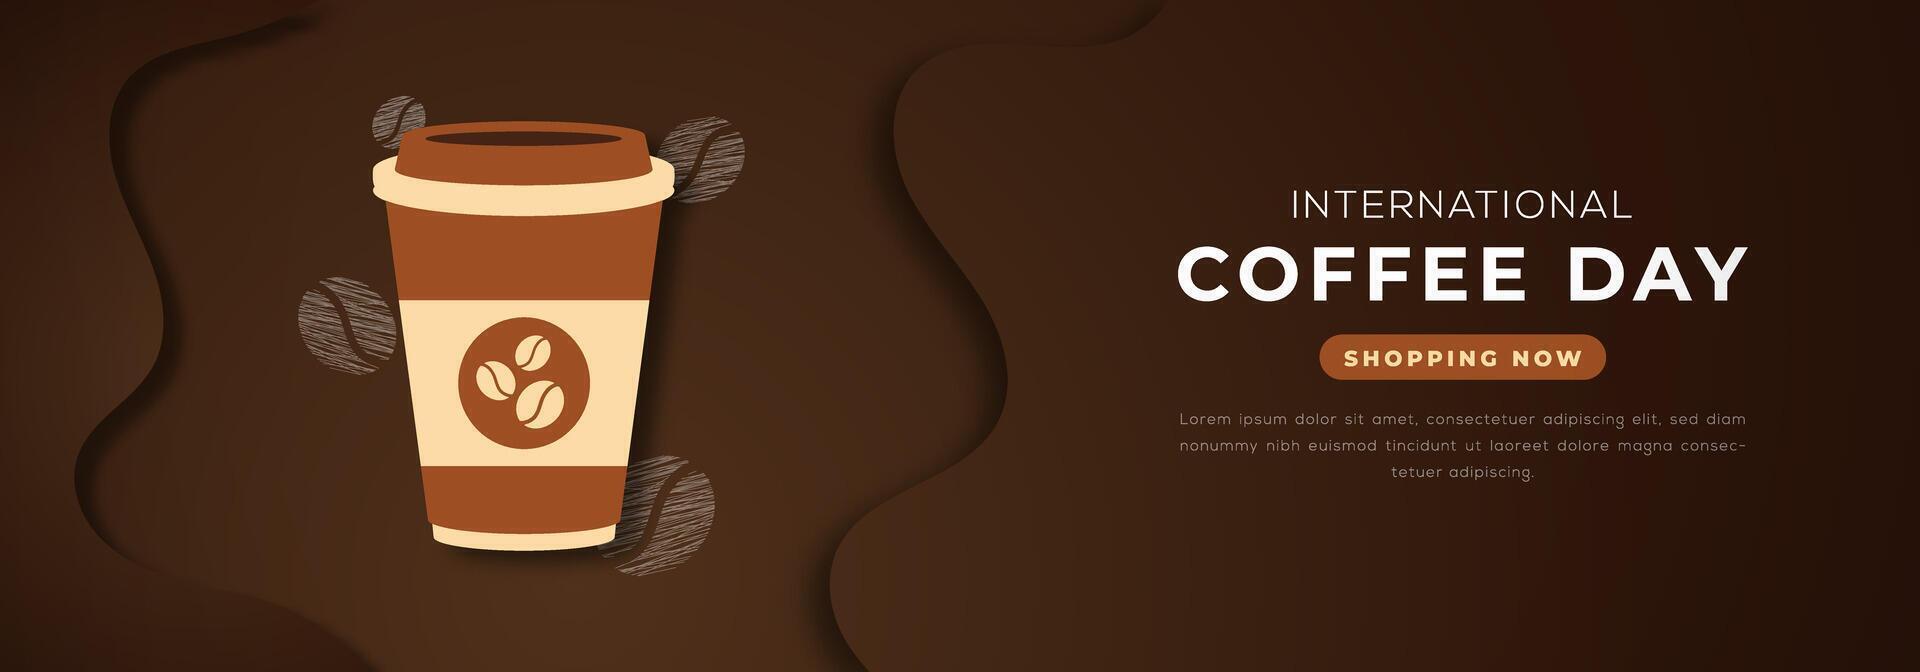 International Coffee Day Paper cut style Vector Design Illustration for Background, Poster, Banner, Advertising, Greeting Card